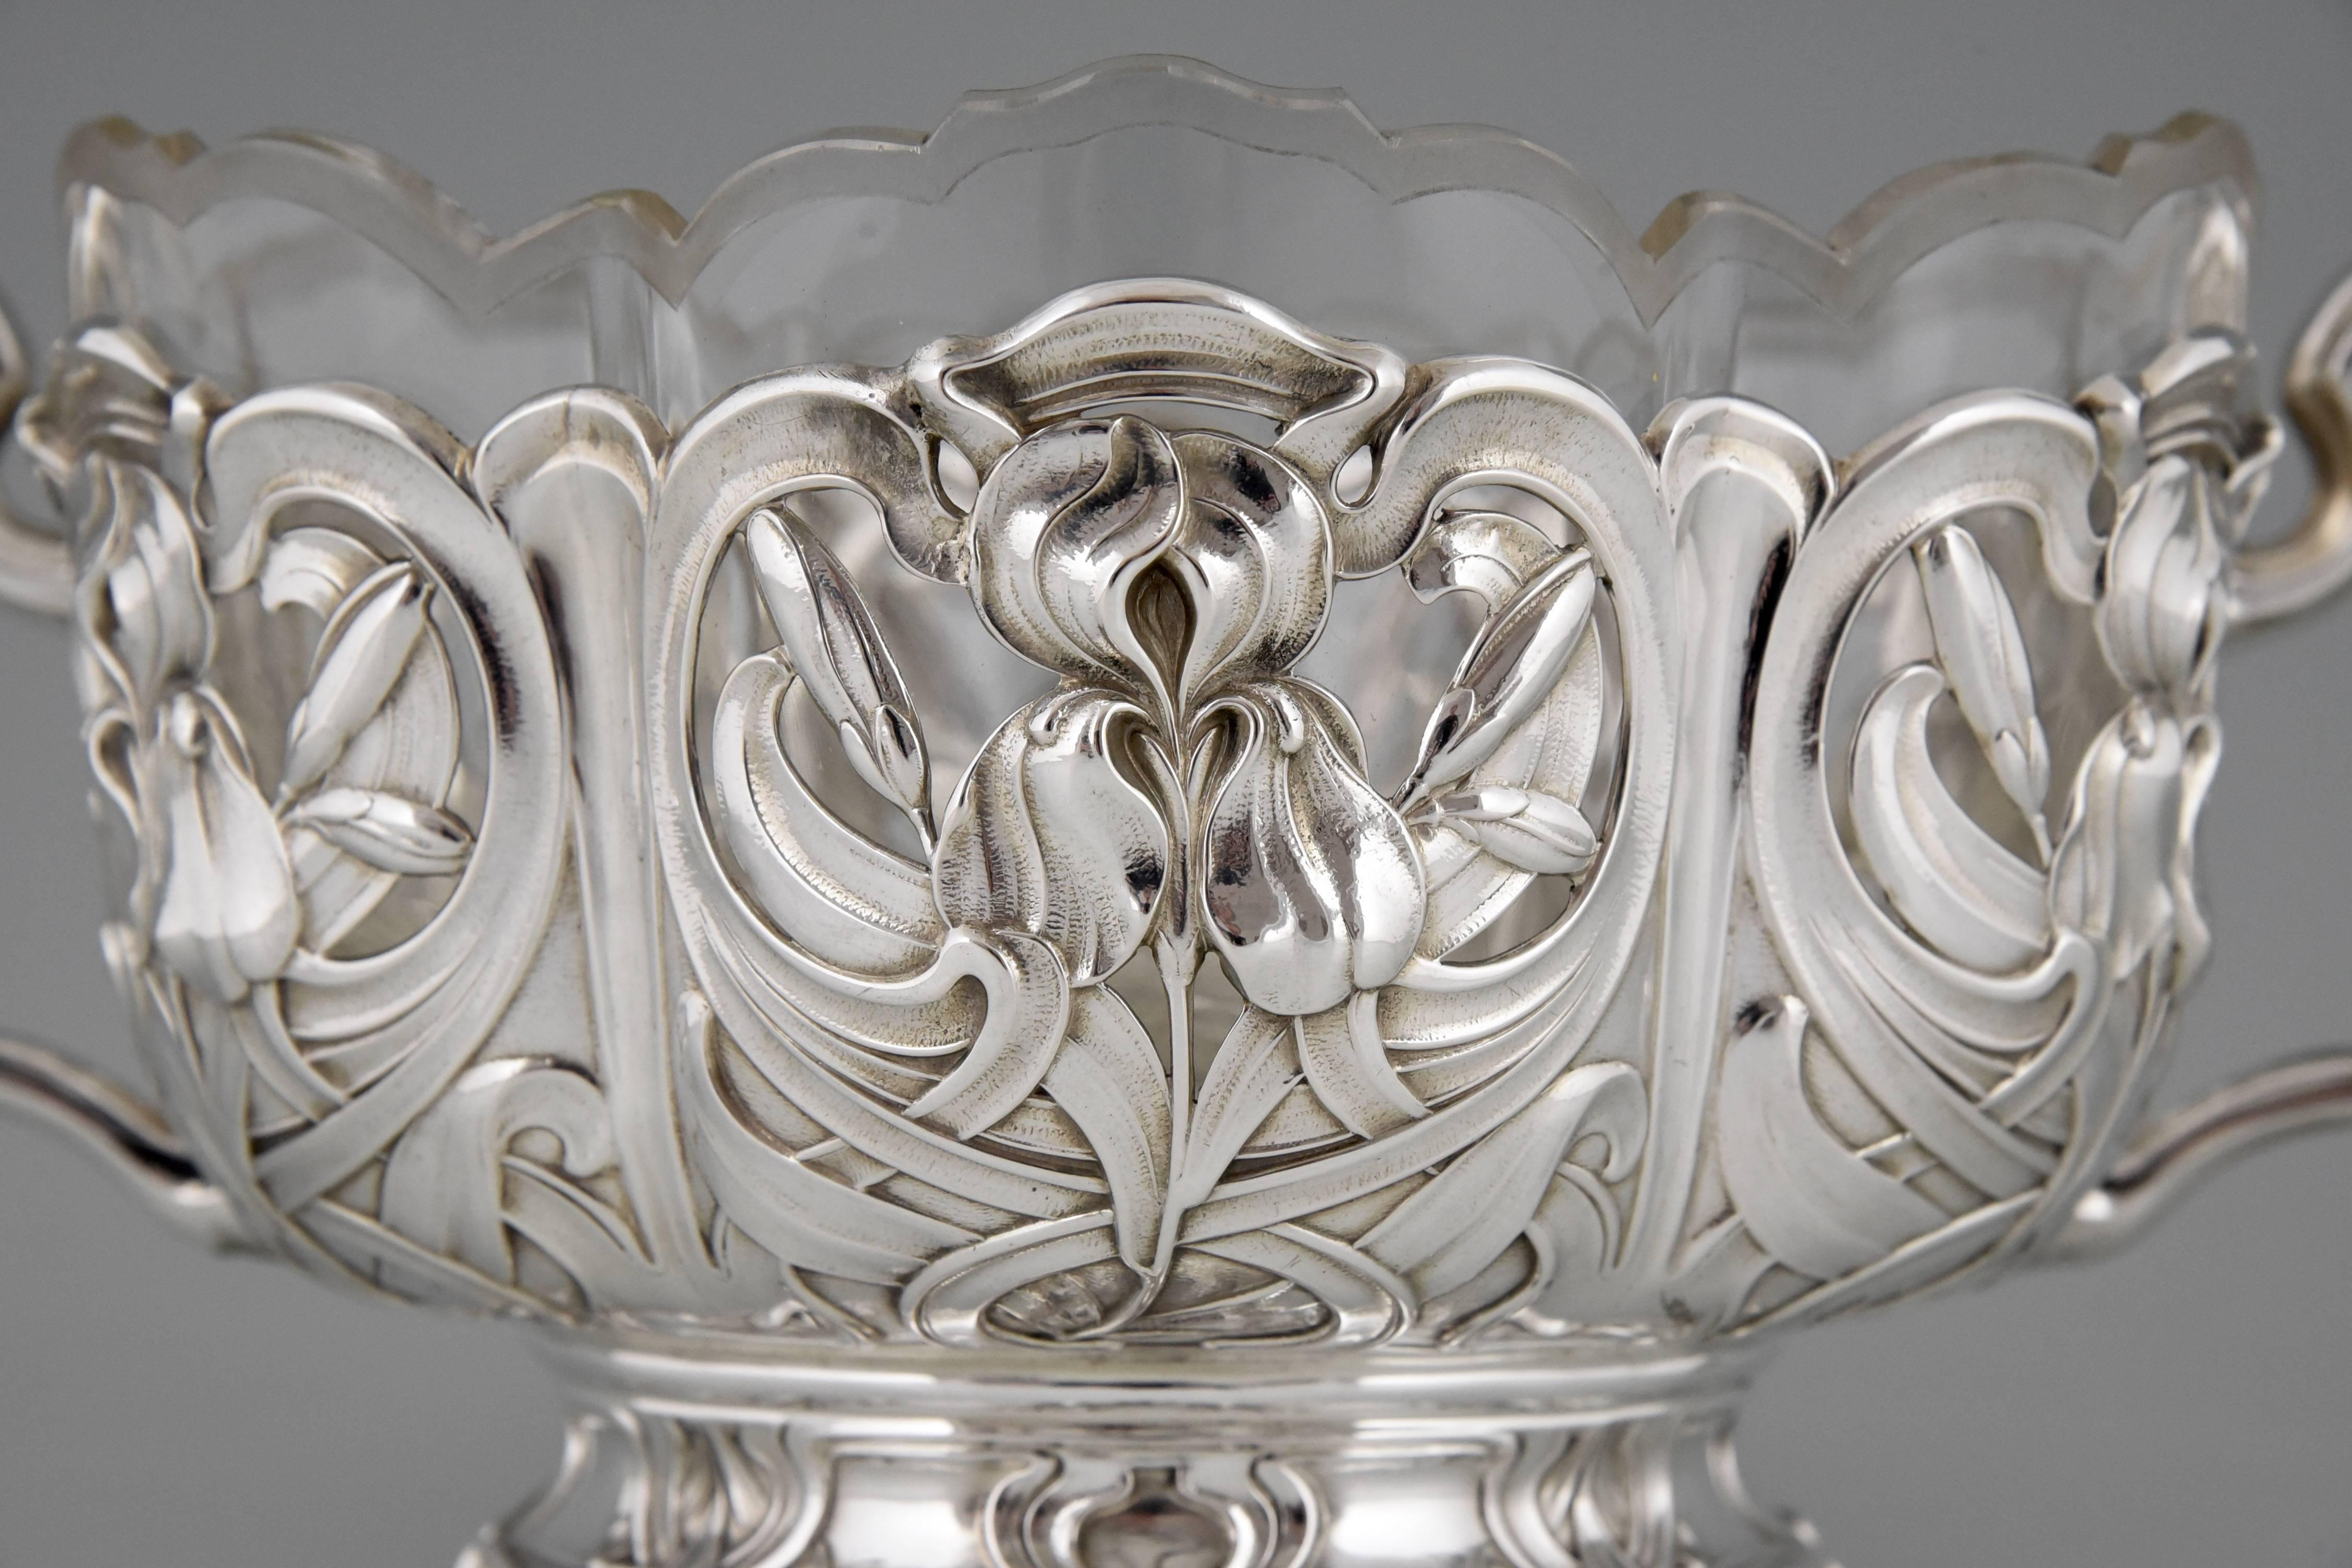 German Art Nouveau silver flower dish with glass liner by A. Strobl, 1900. 2